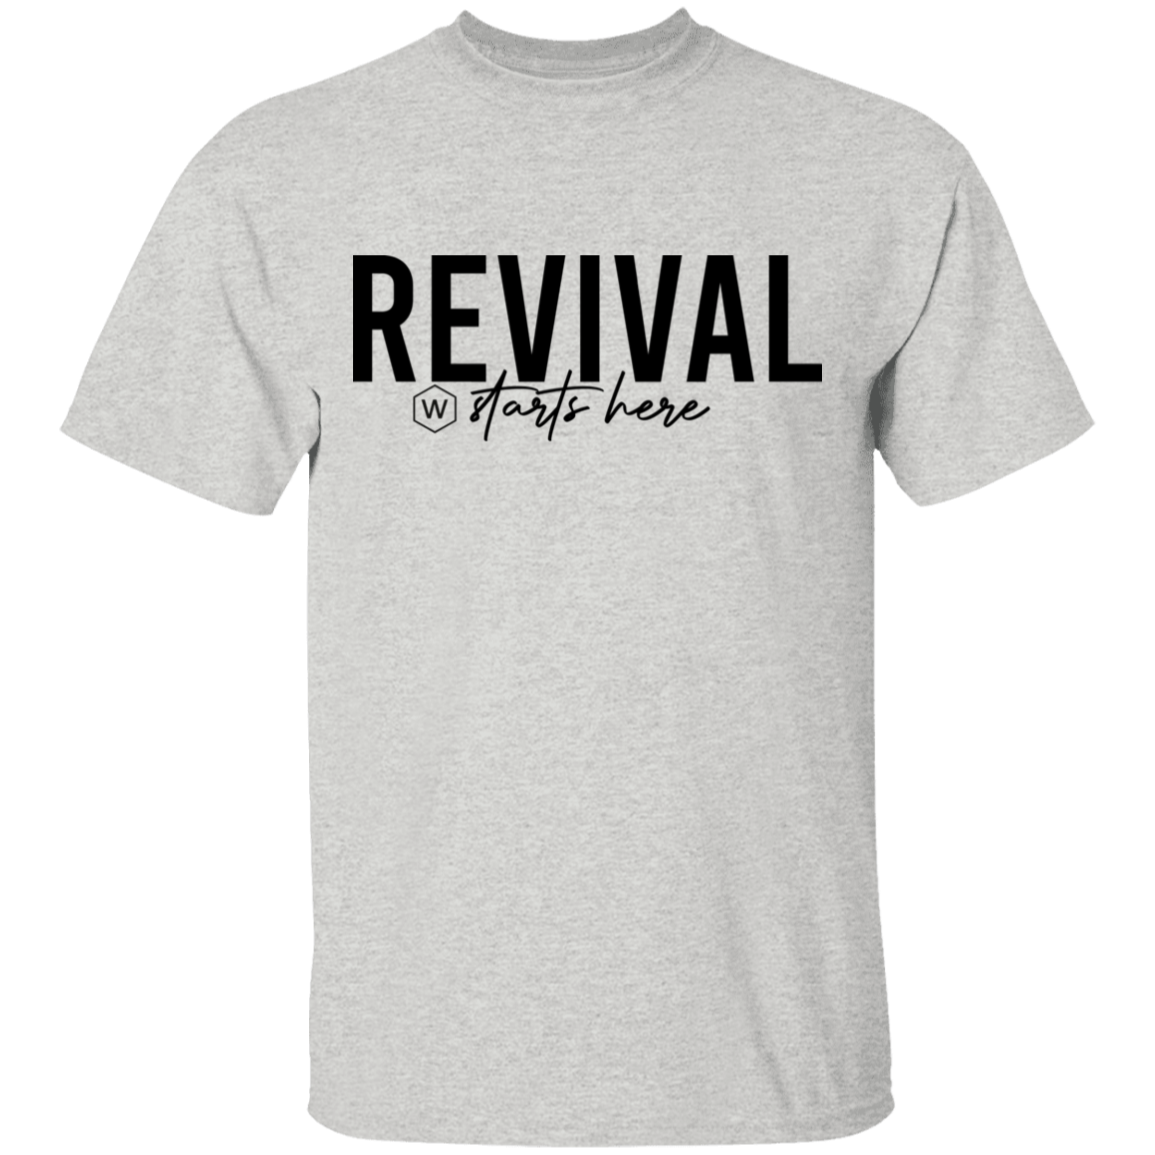 Revival Starts Here Tee